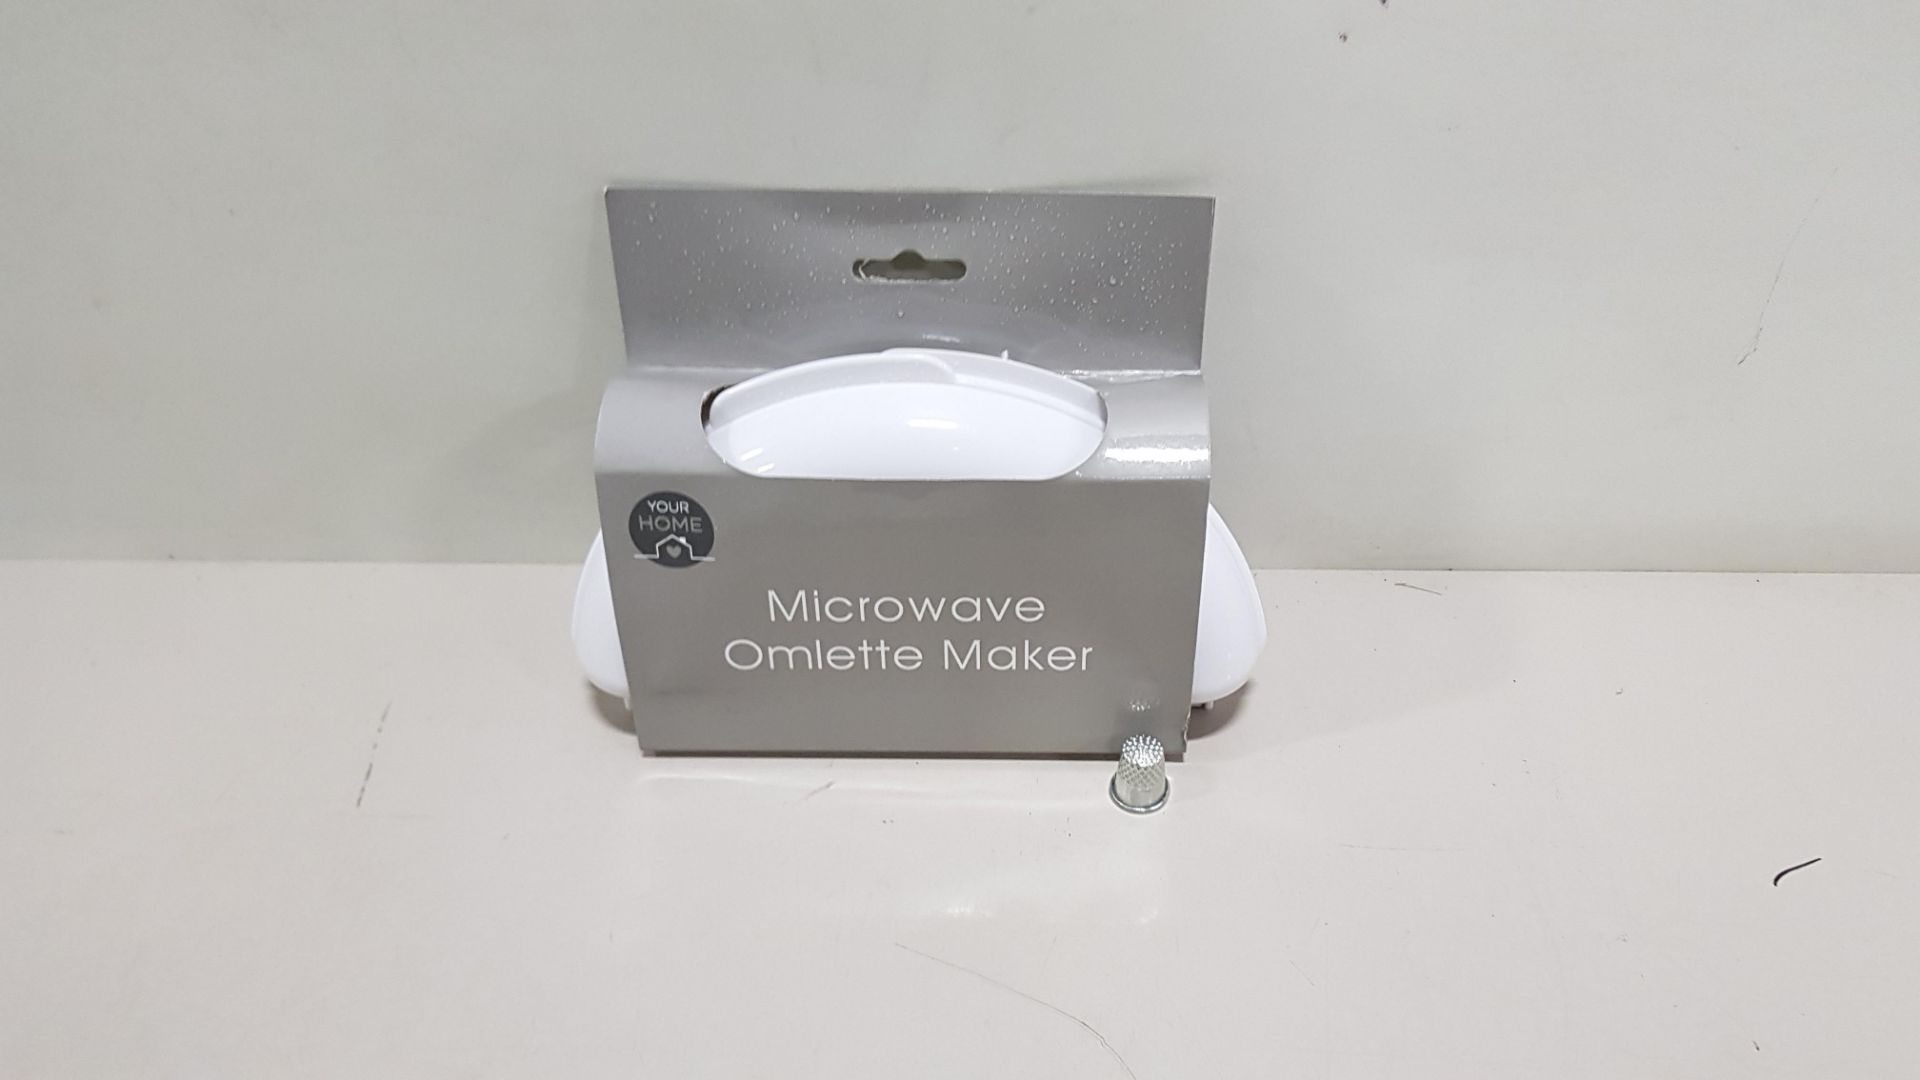 144 X BRAND NEW YOUR HOME MICROWAVE OMLETTE MAKER CONTAINED IN 7 BOXES